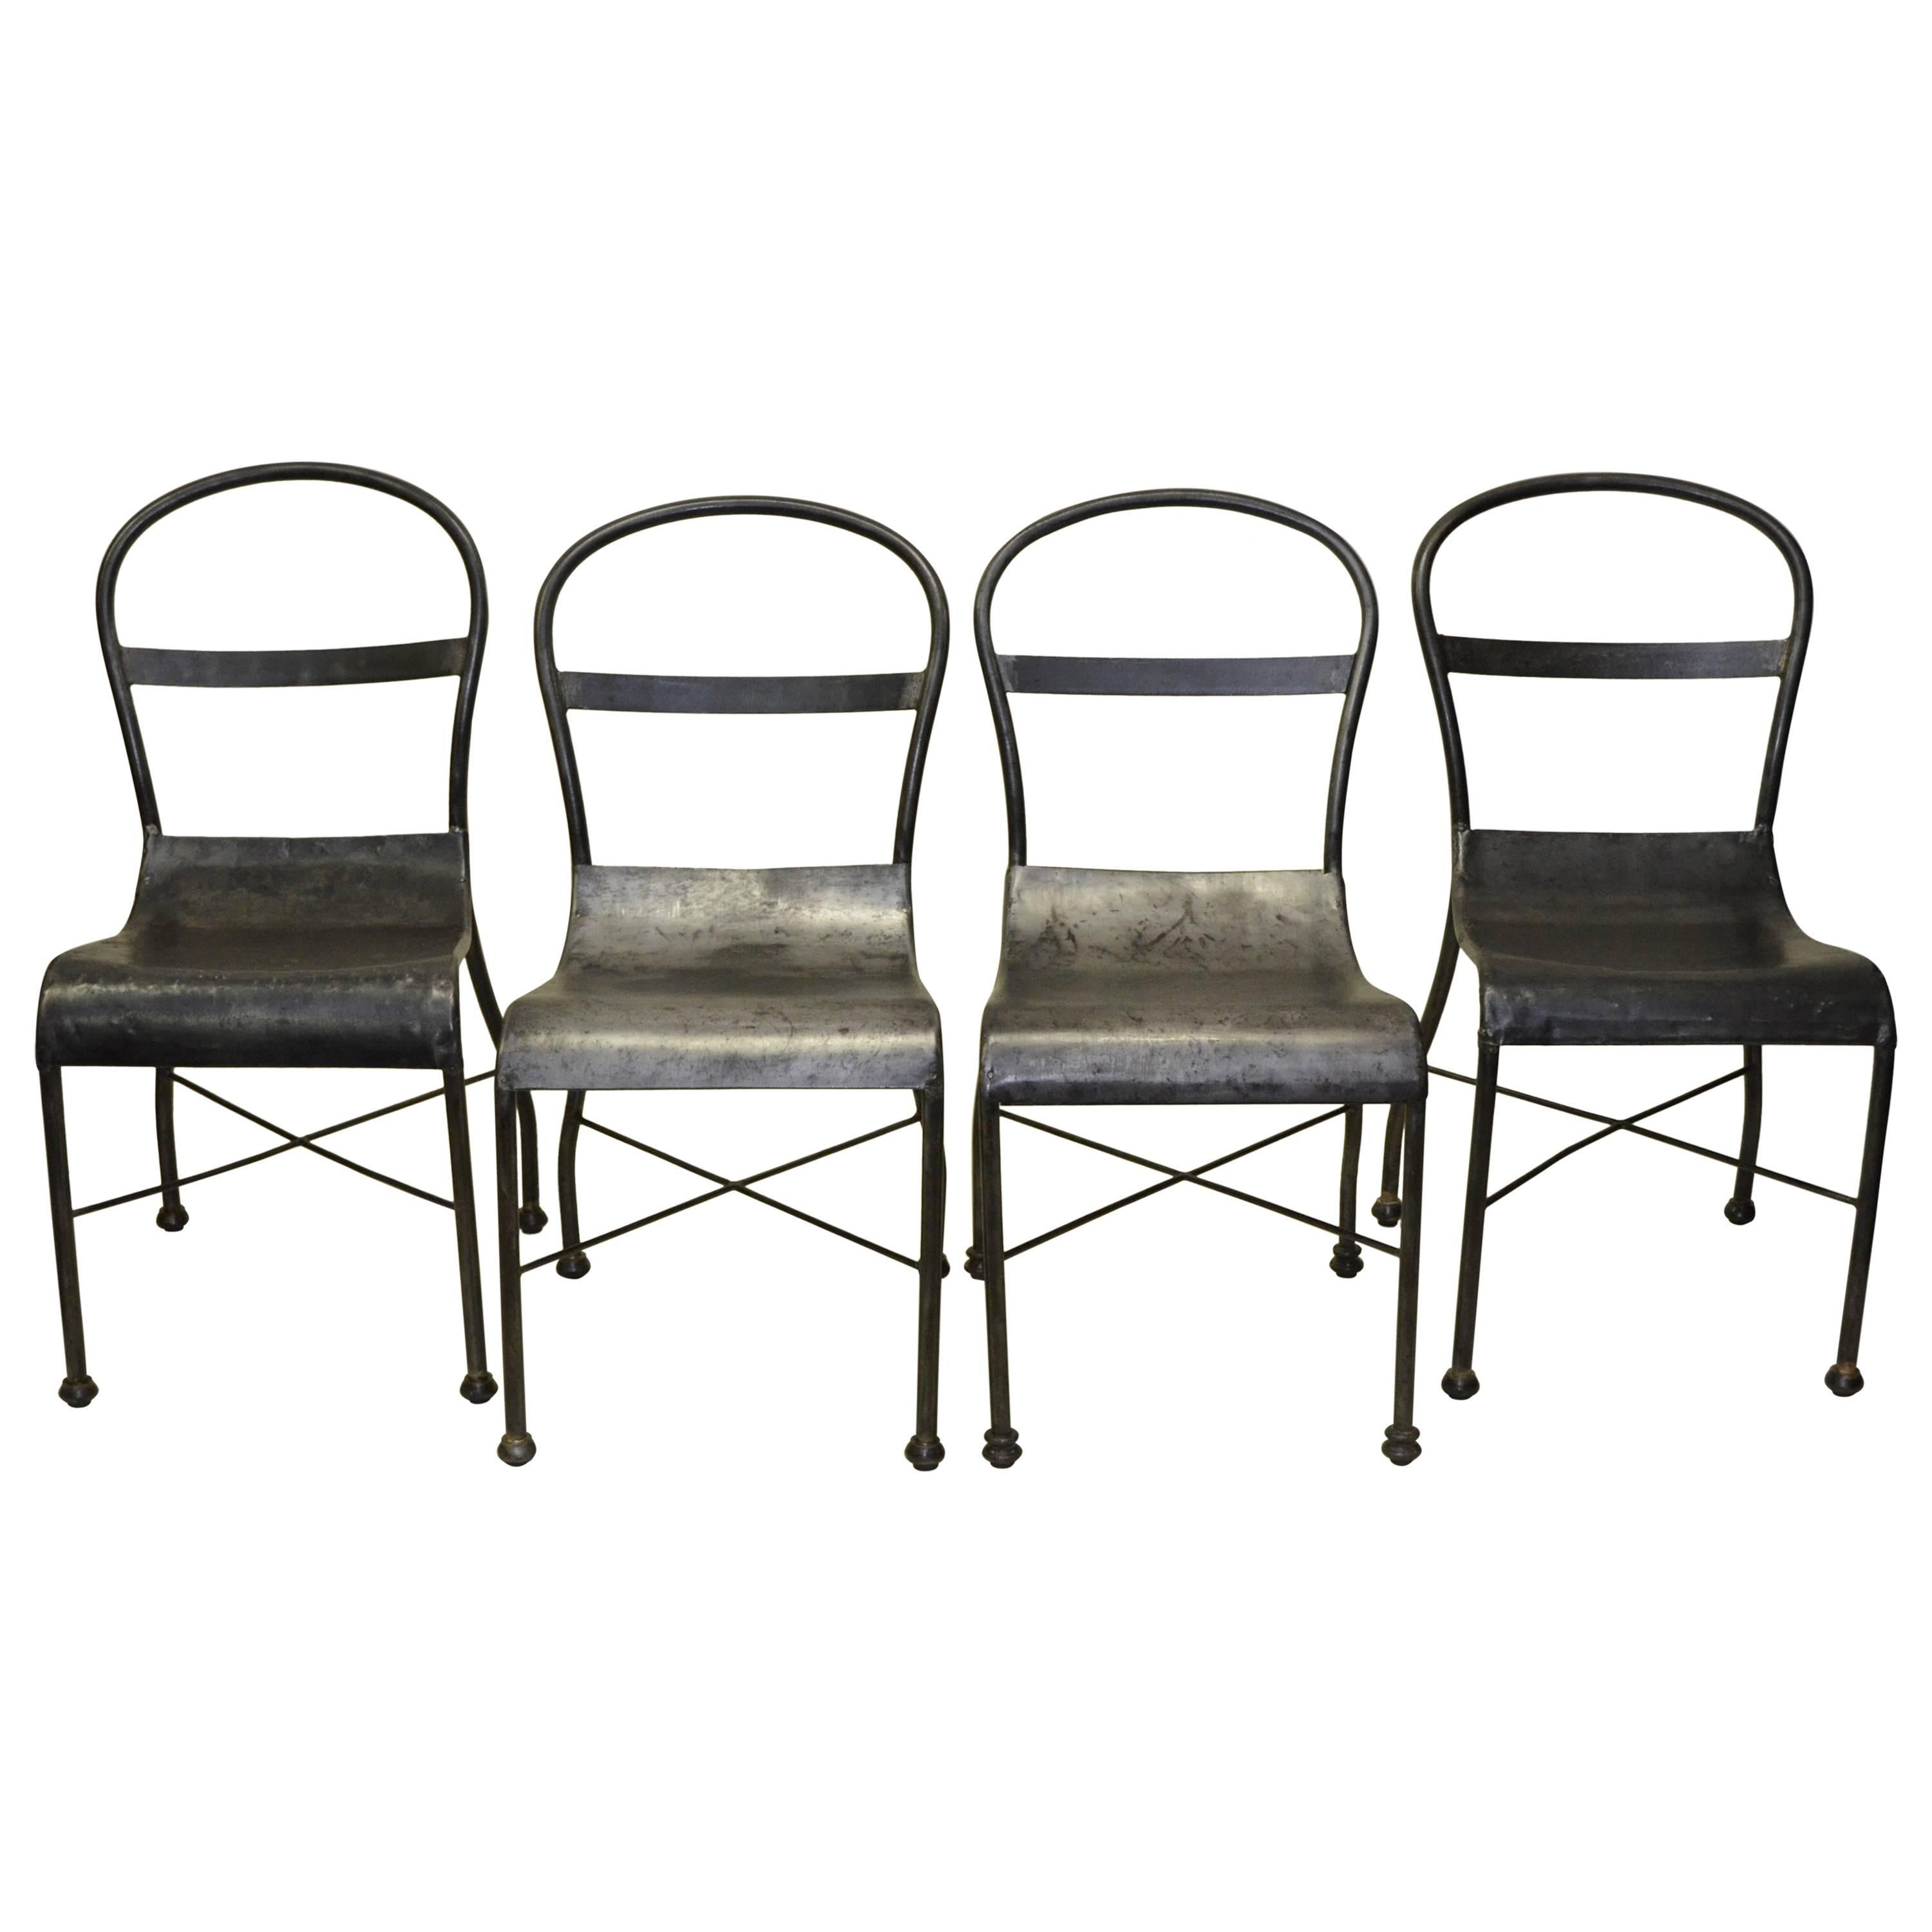 1930s Set of Four Polished Metal Chairs For Sale